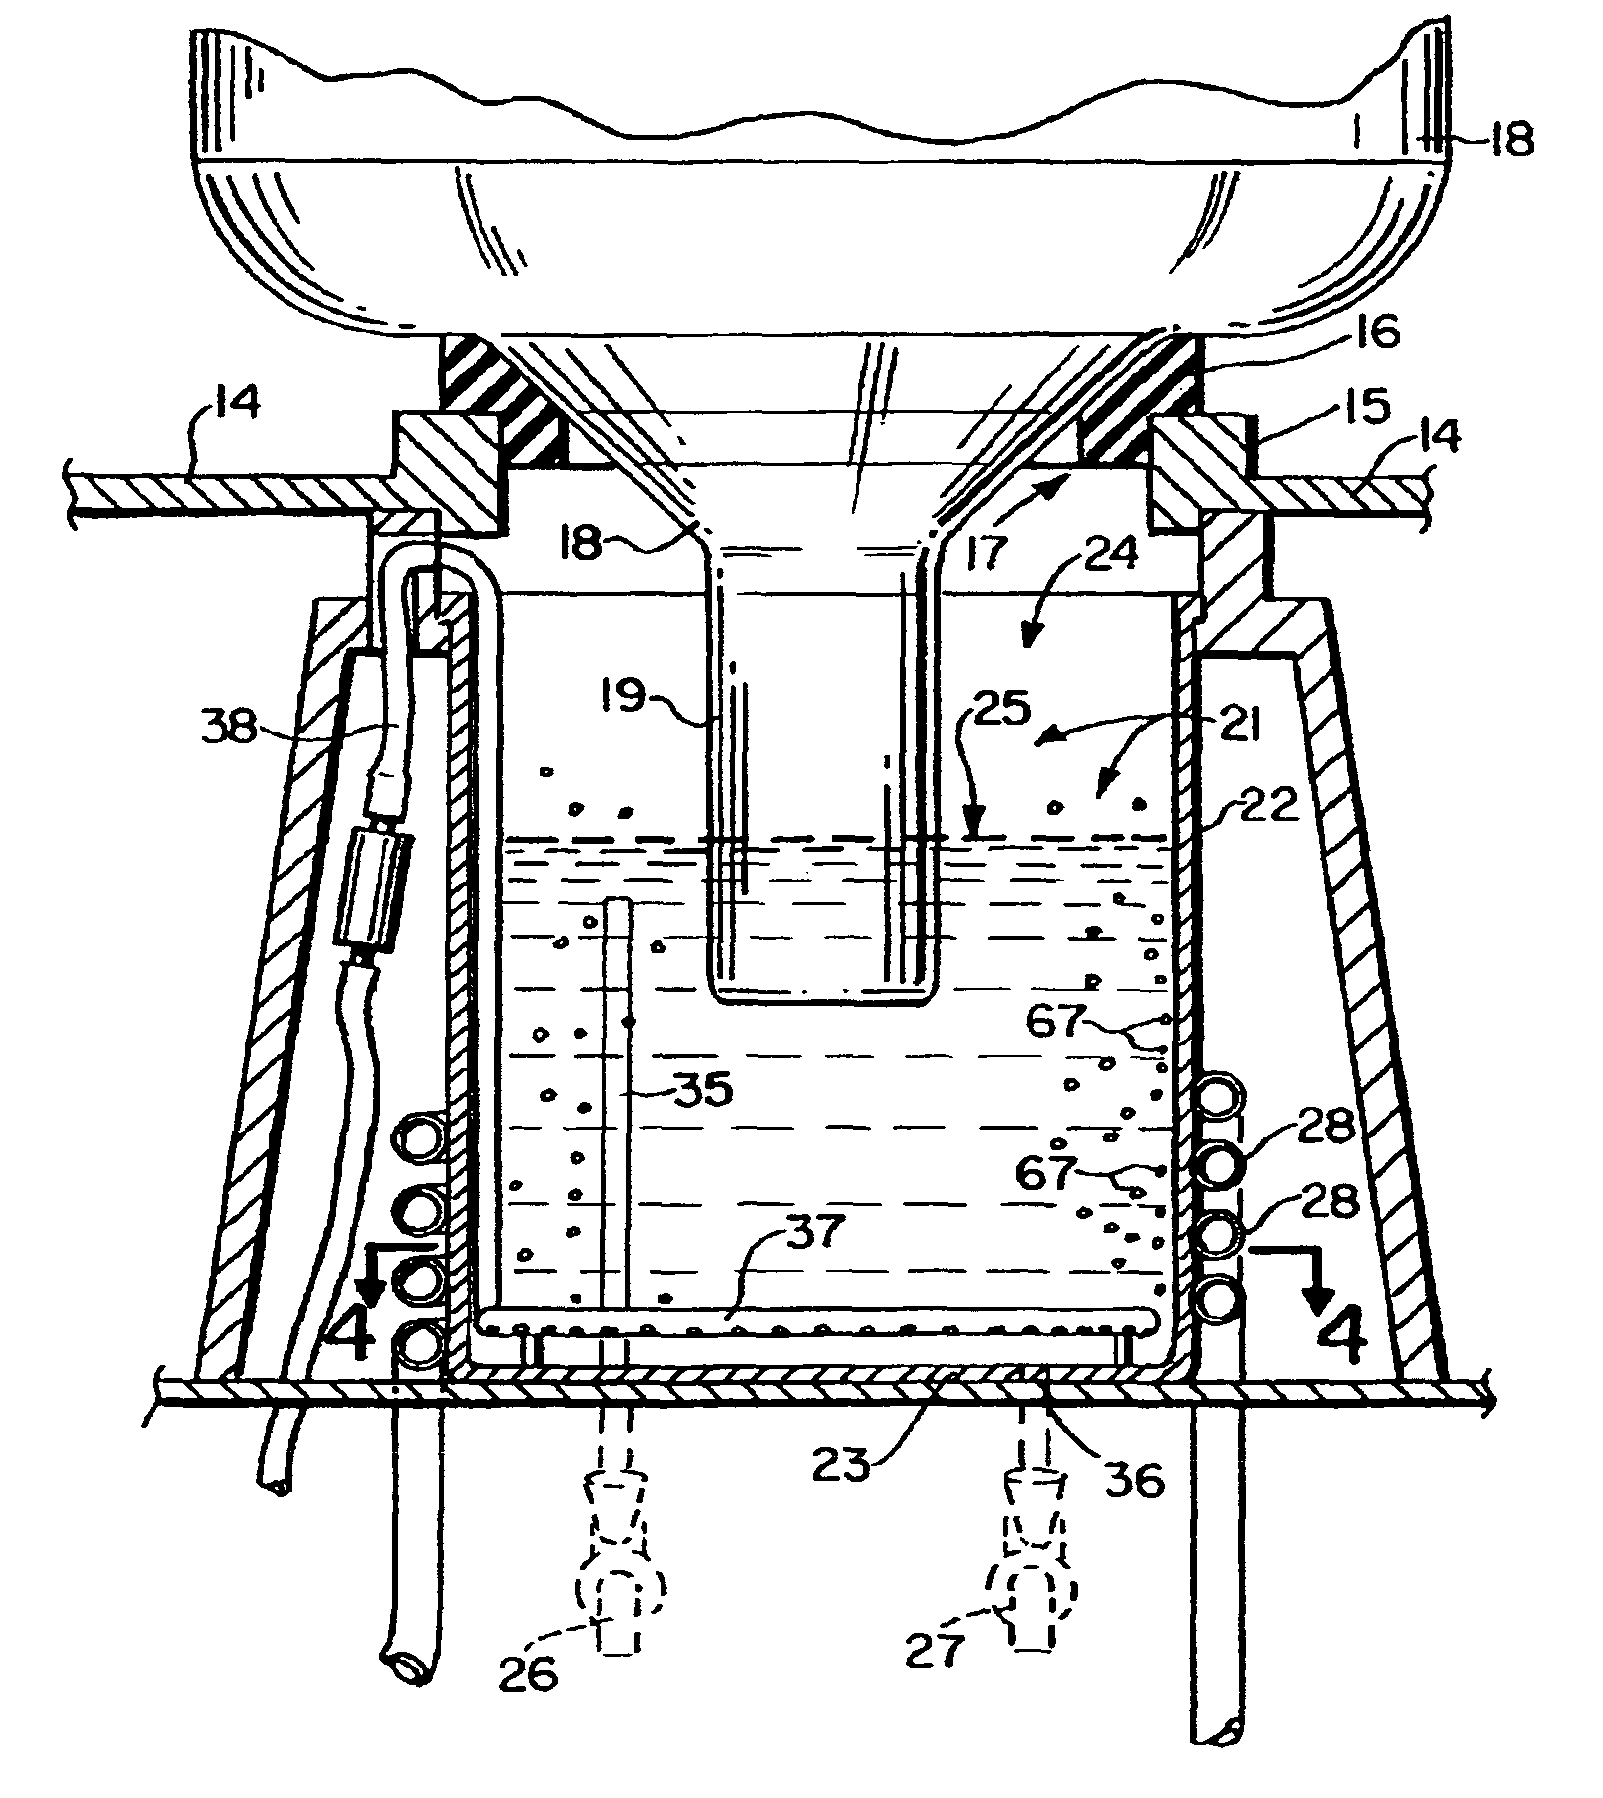 Method and apparatus for disinfecting a refrigerated water cooler reservoir